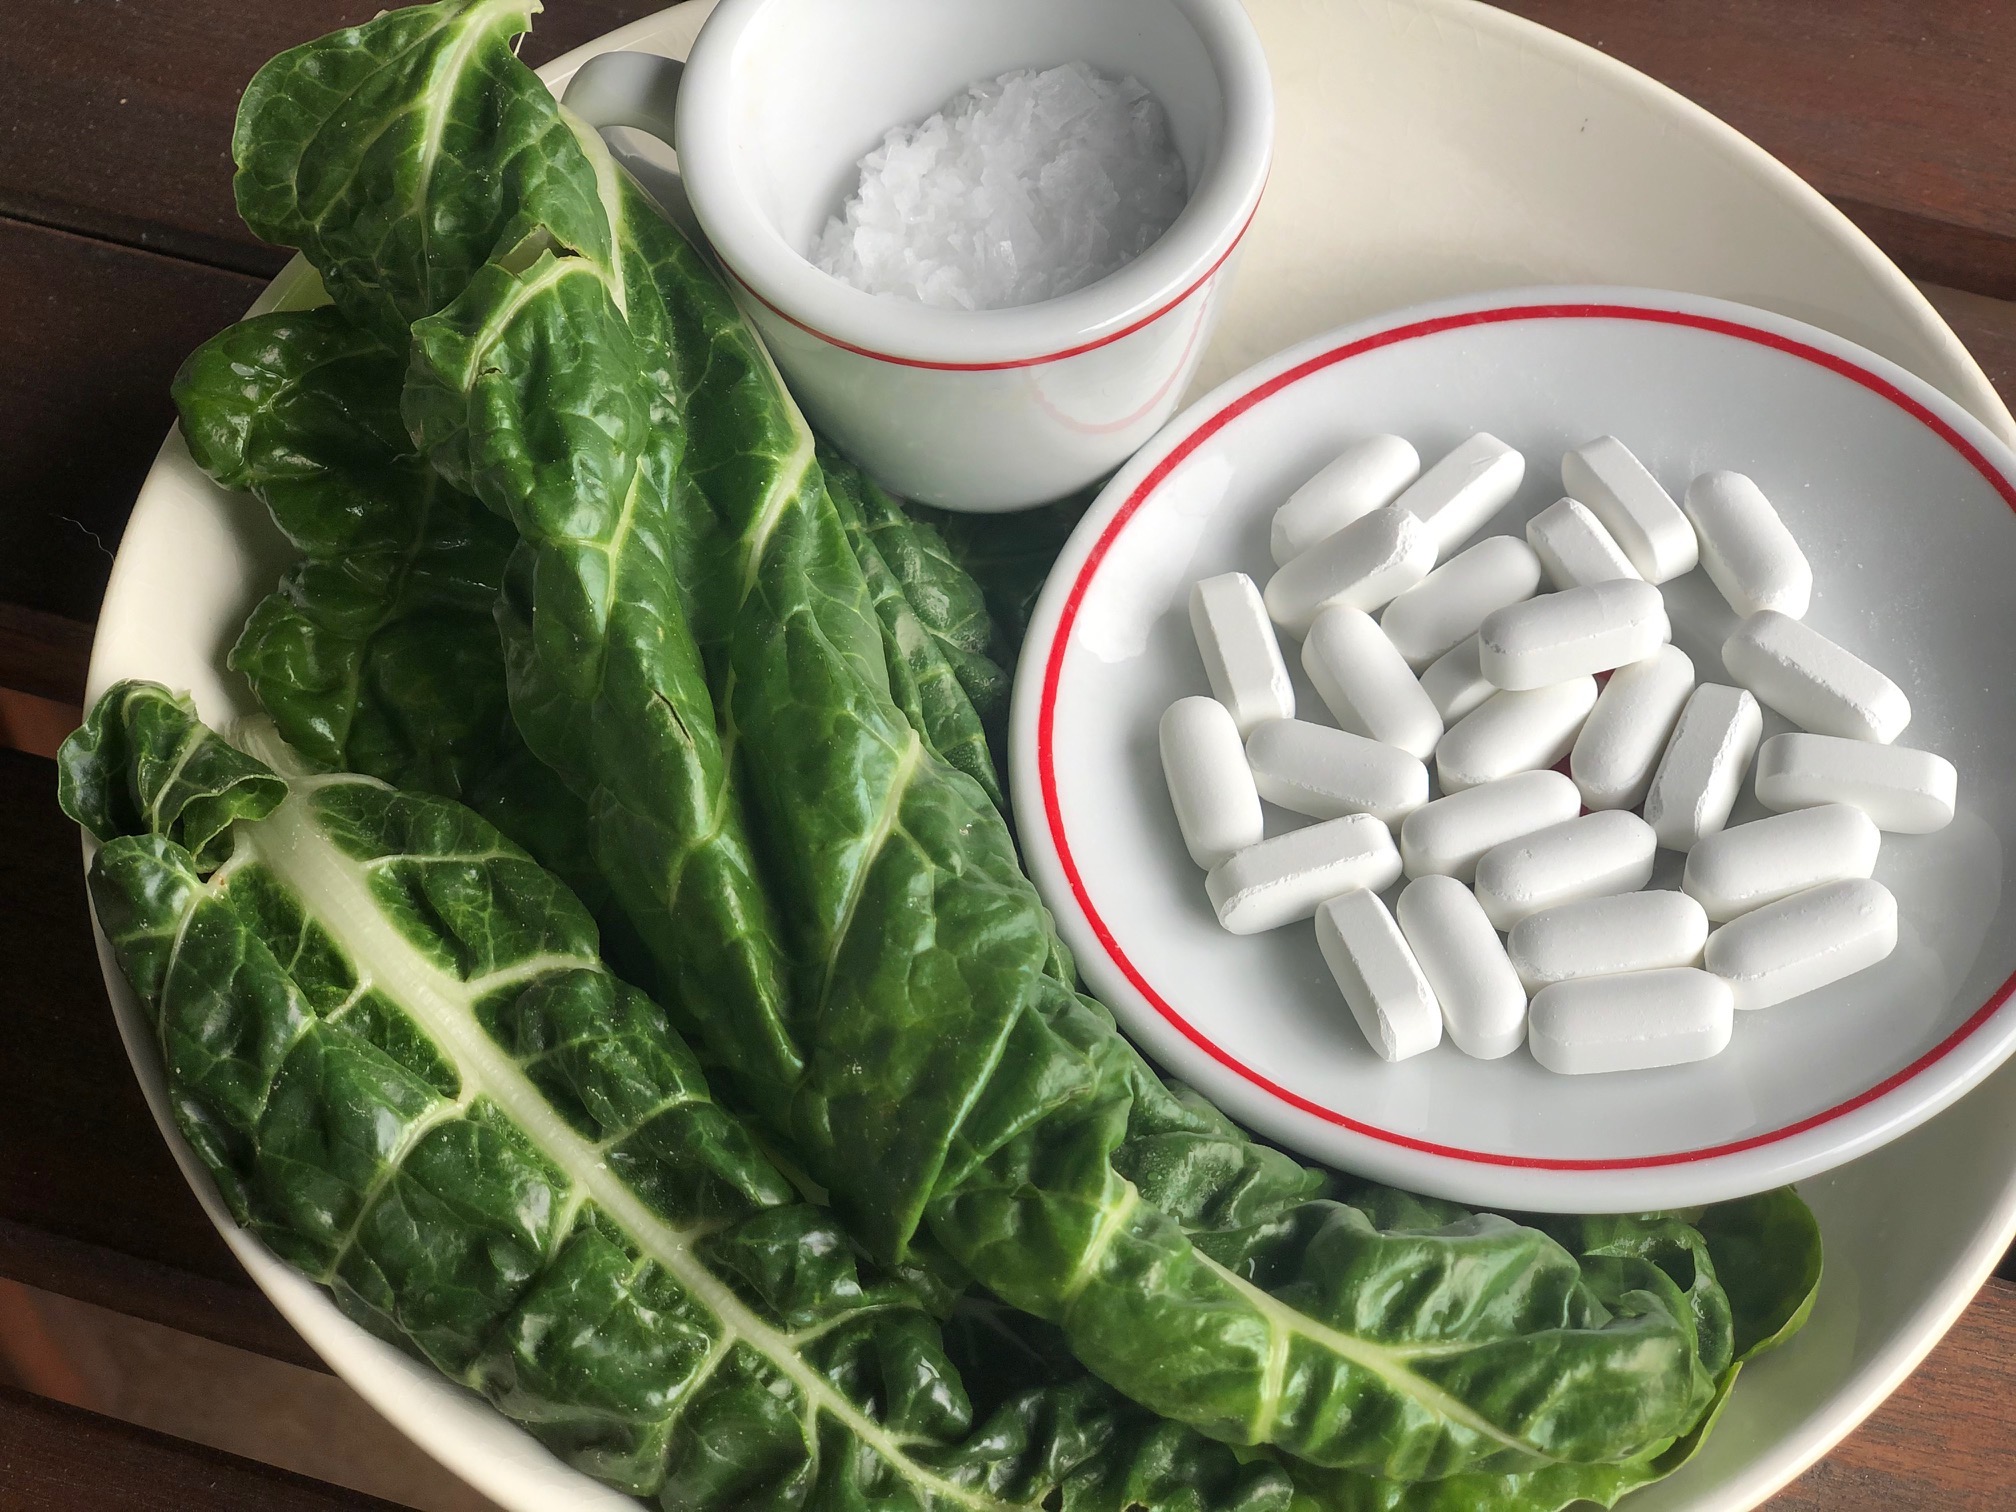 A Vivacity Acupuncture photograph showing various methods of magnesium intake: leafy greens (bottom left), tablets (center right) and Epsom salts (top center).